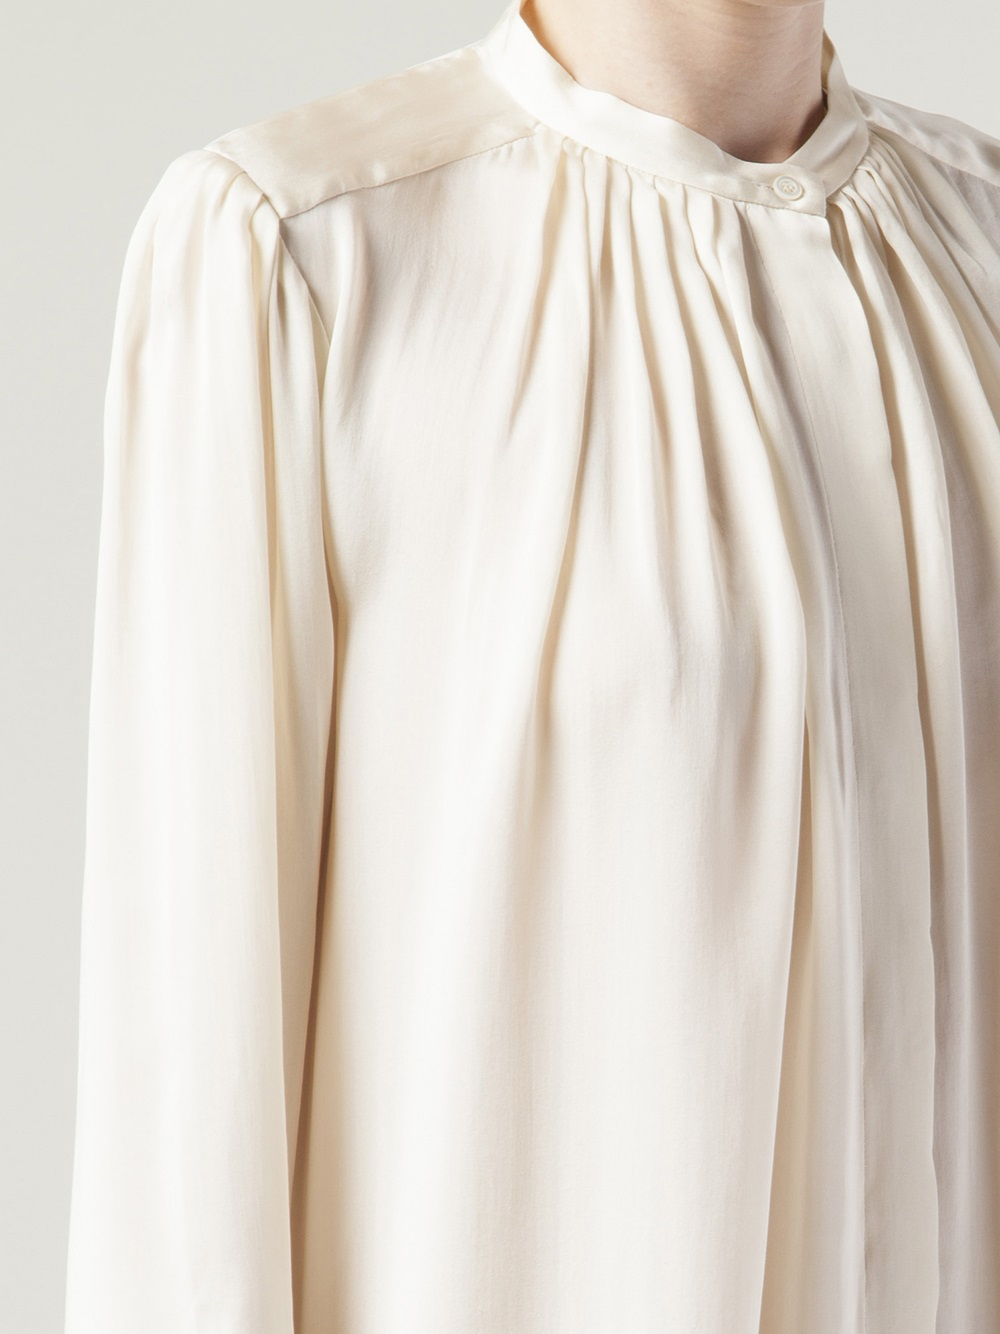 Lyst - Vanessa Bruno Pleated Button Down Blouse in White